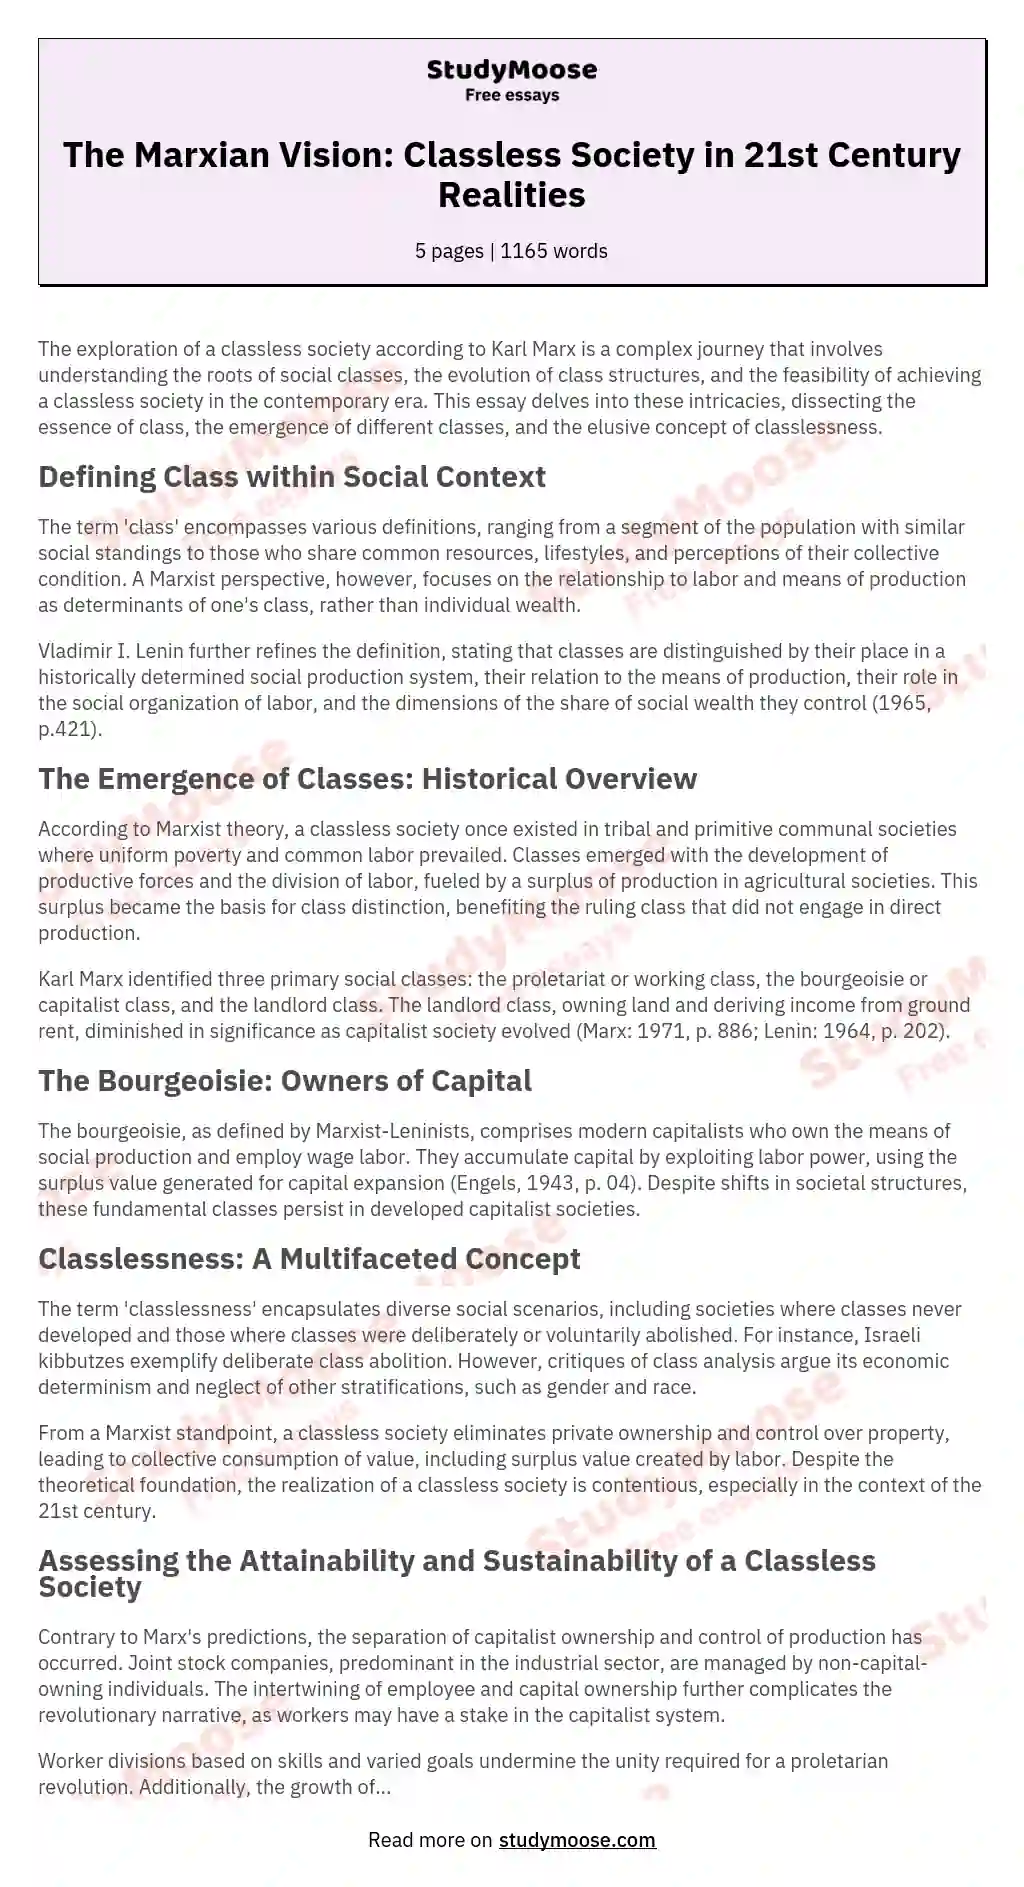 The Marxian Vision: Classless Society in 21st Century Realities essay